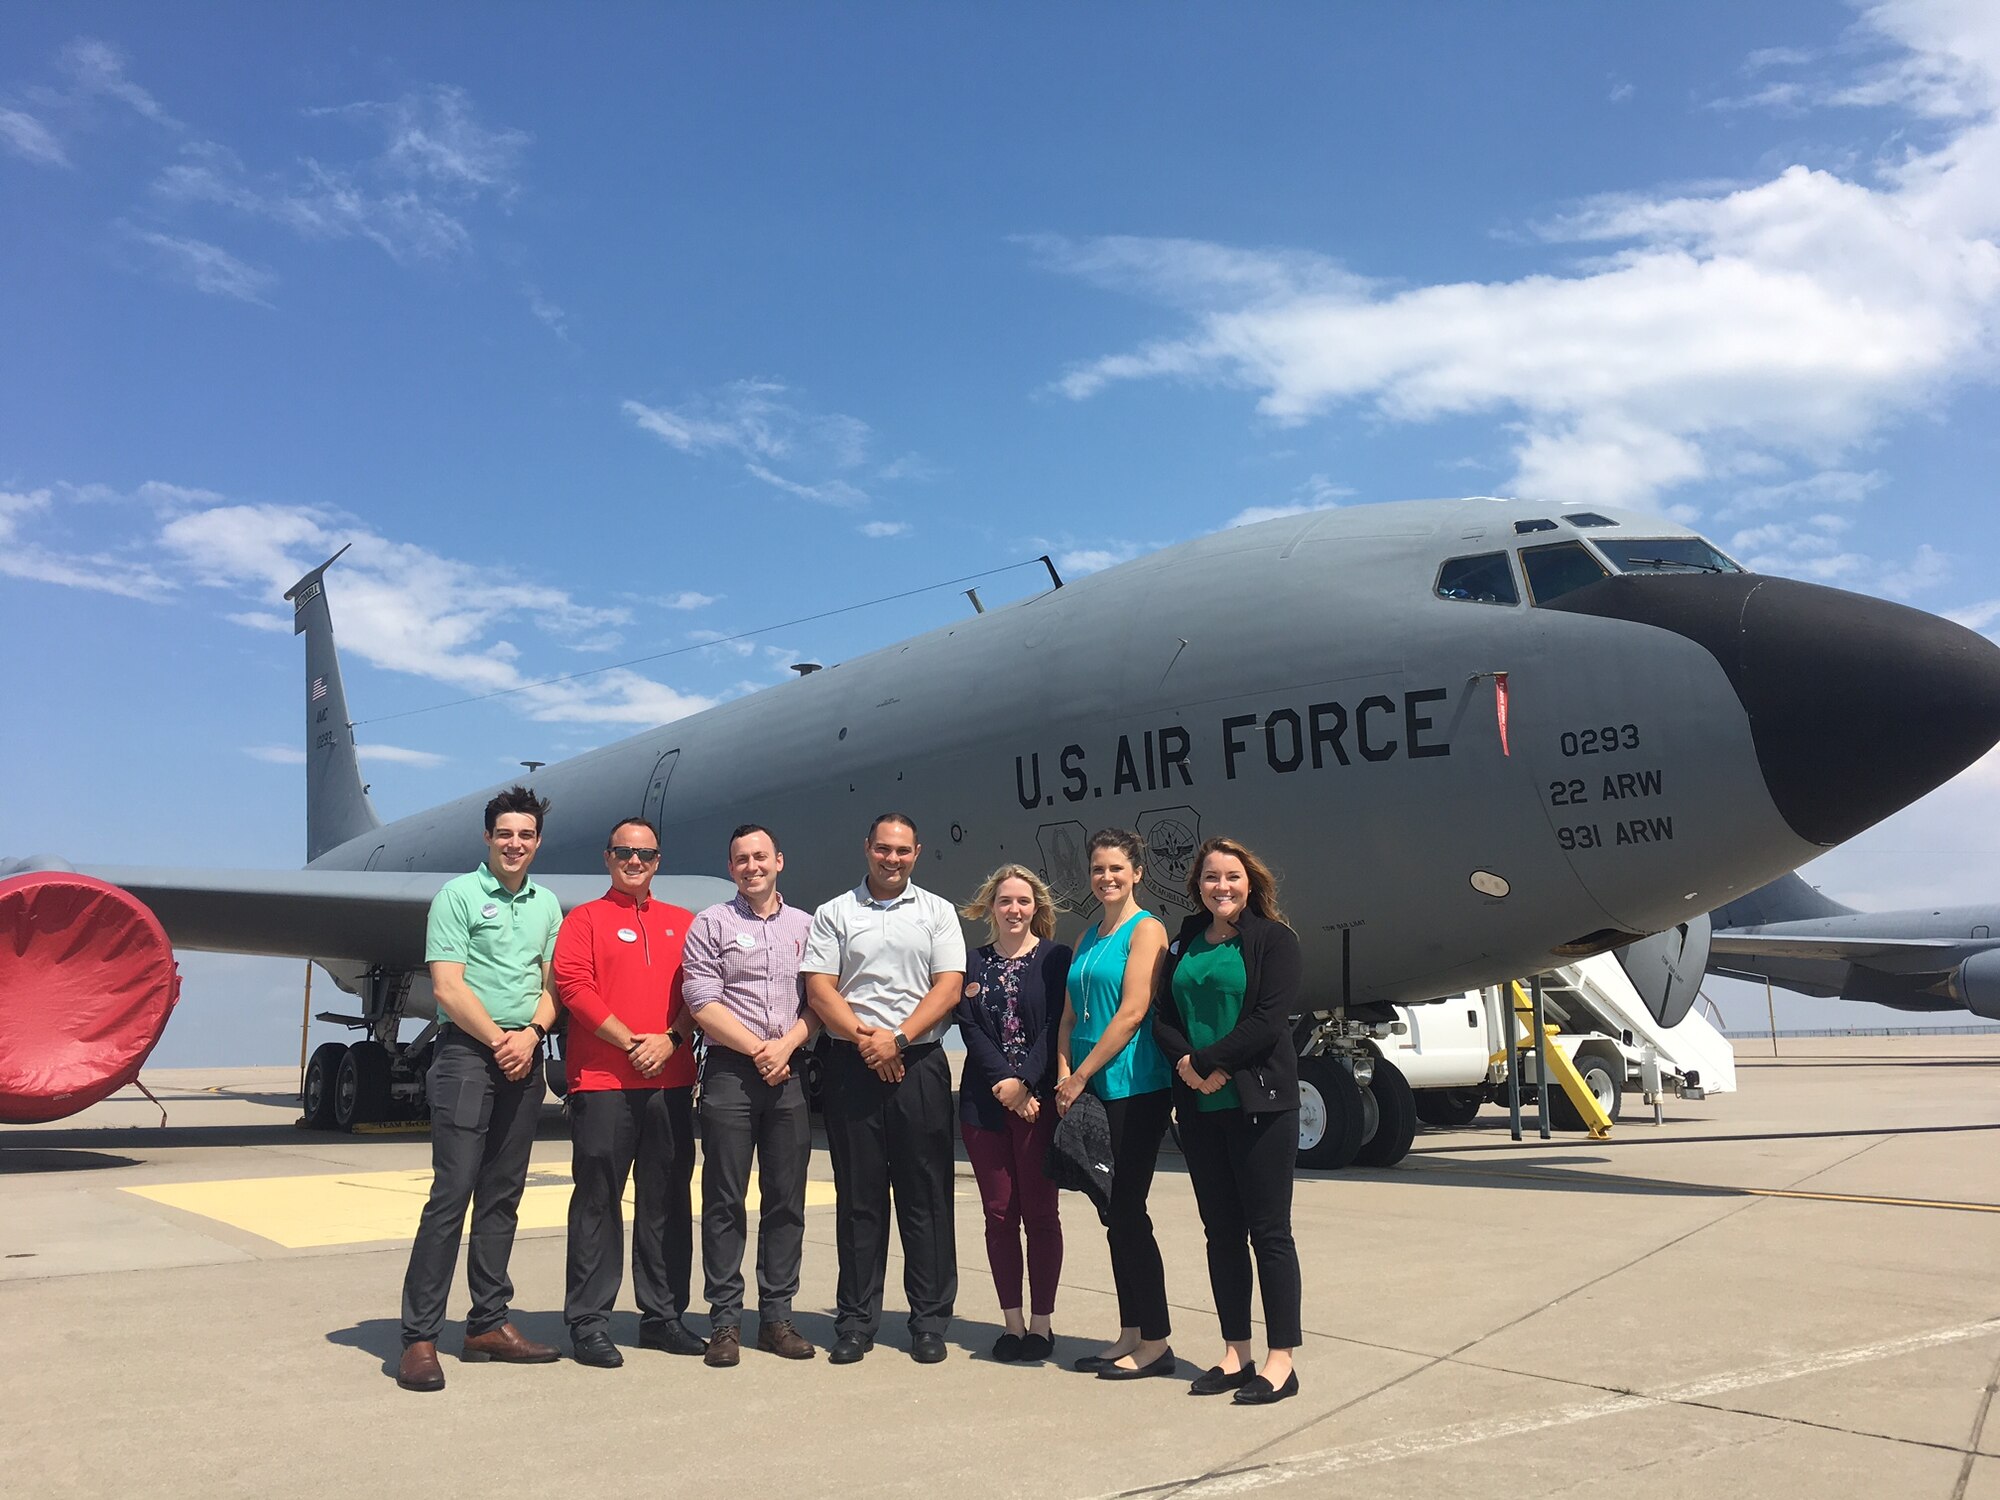 Andrew Nelson (center), 22nd Maintenance Group honorary commander, poses with his Chick-fil-A directors in front of a KC-135 Stratotanker June 27, 2017, at McConnell Air Force Base, Kansas. Nelson and his team went on a tour of the base maintenance facilities and flight line to gain a better understanding of what Airmen do day in and day out. (Courtesy photo)